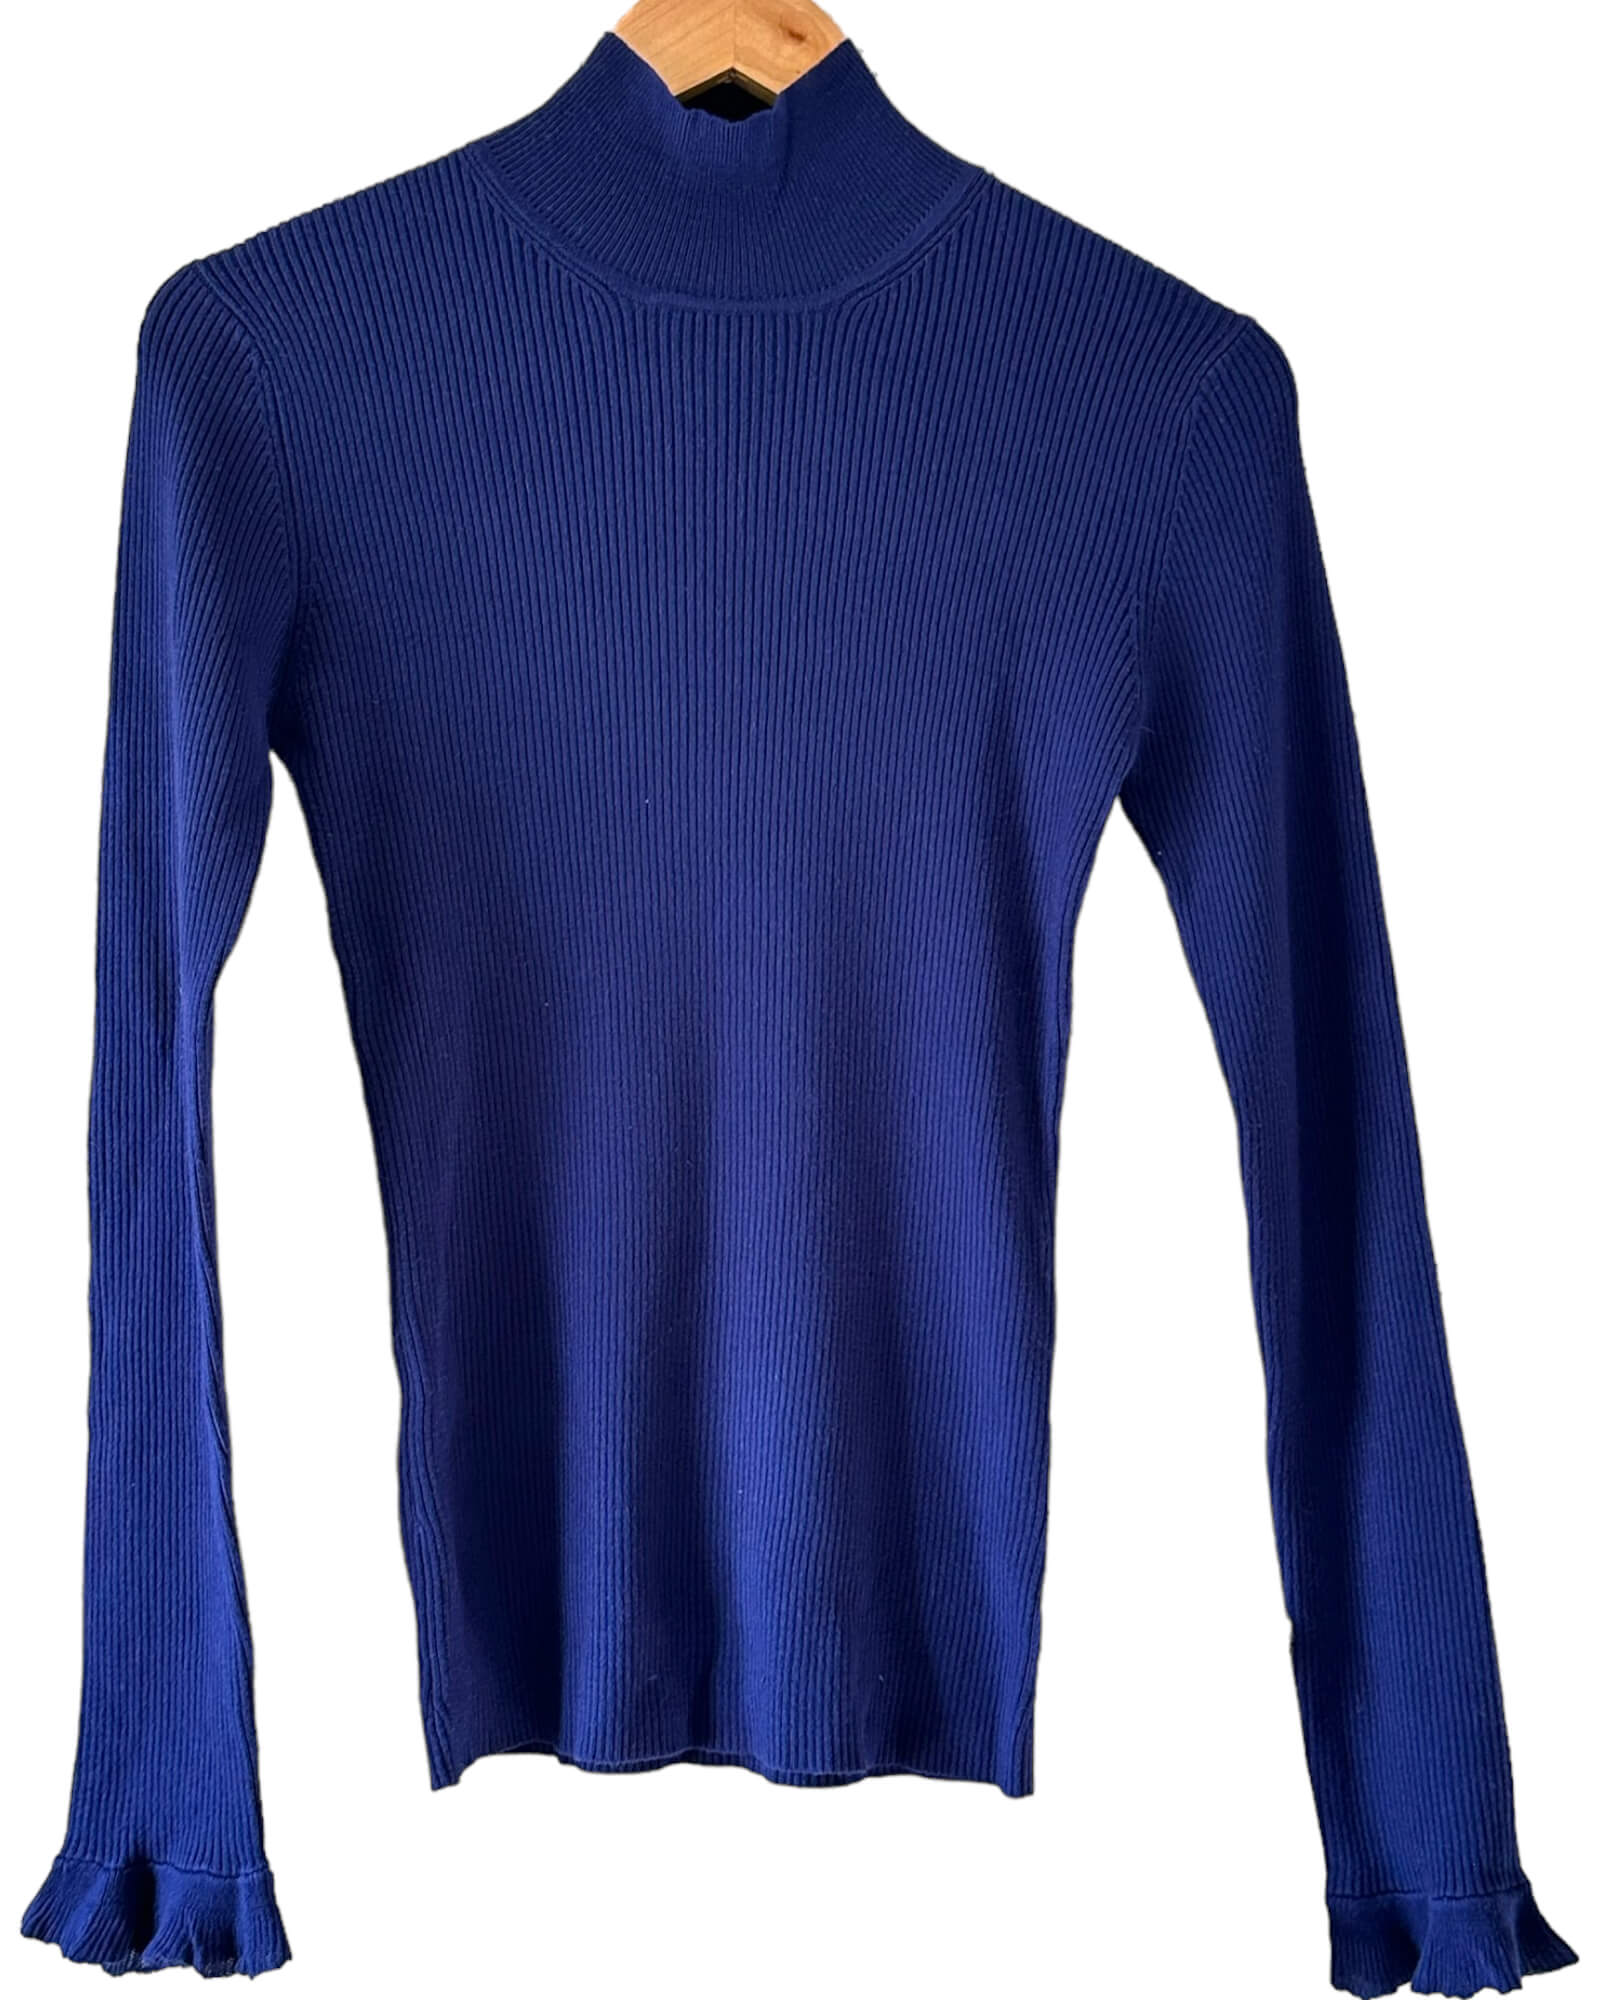 Cool Winter EVIE midnight navy blue ribbed ruffle cuff knit top